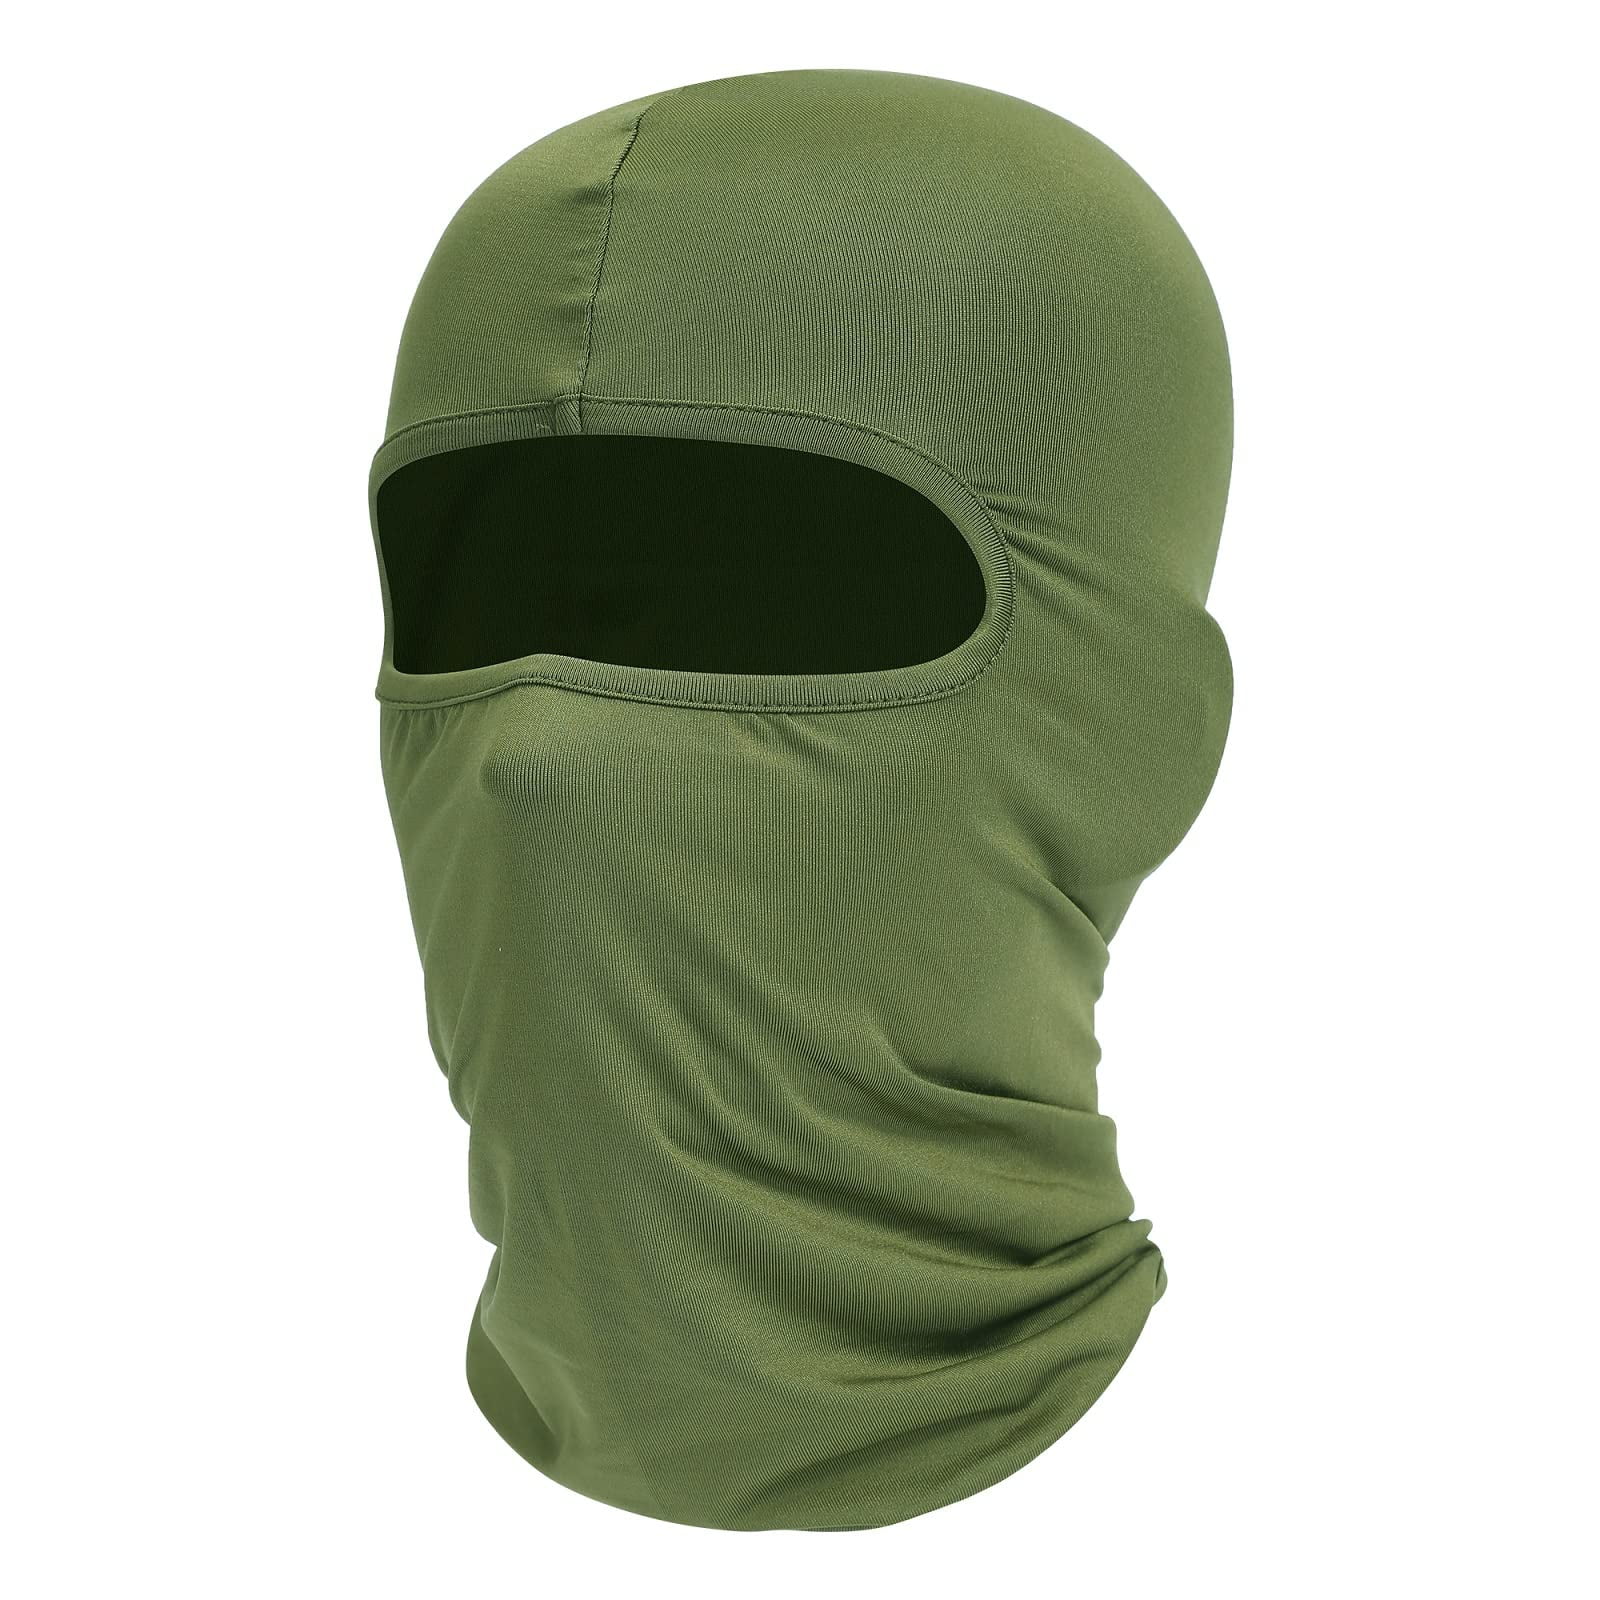 Fuinloth Balaclava Ski Mask, UV Protector Cooling Motorcycle Neck Gaiter  Scarf for Men/Women Army Green 